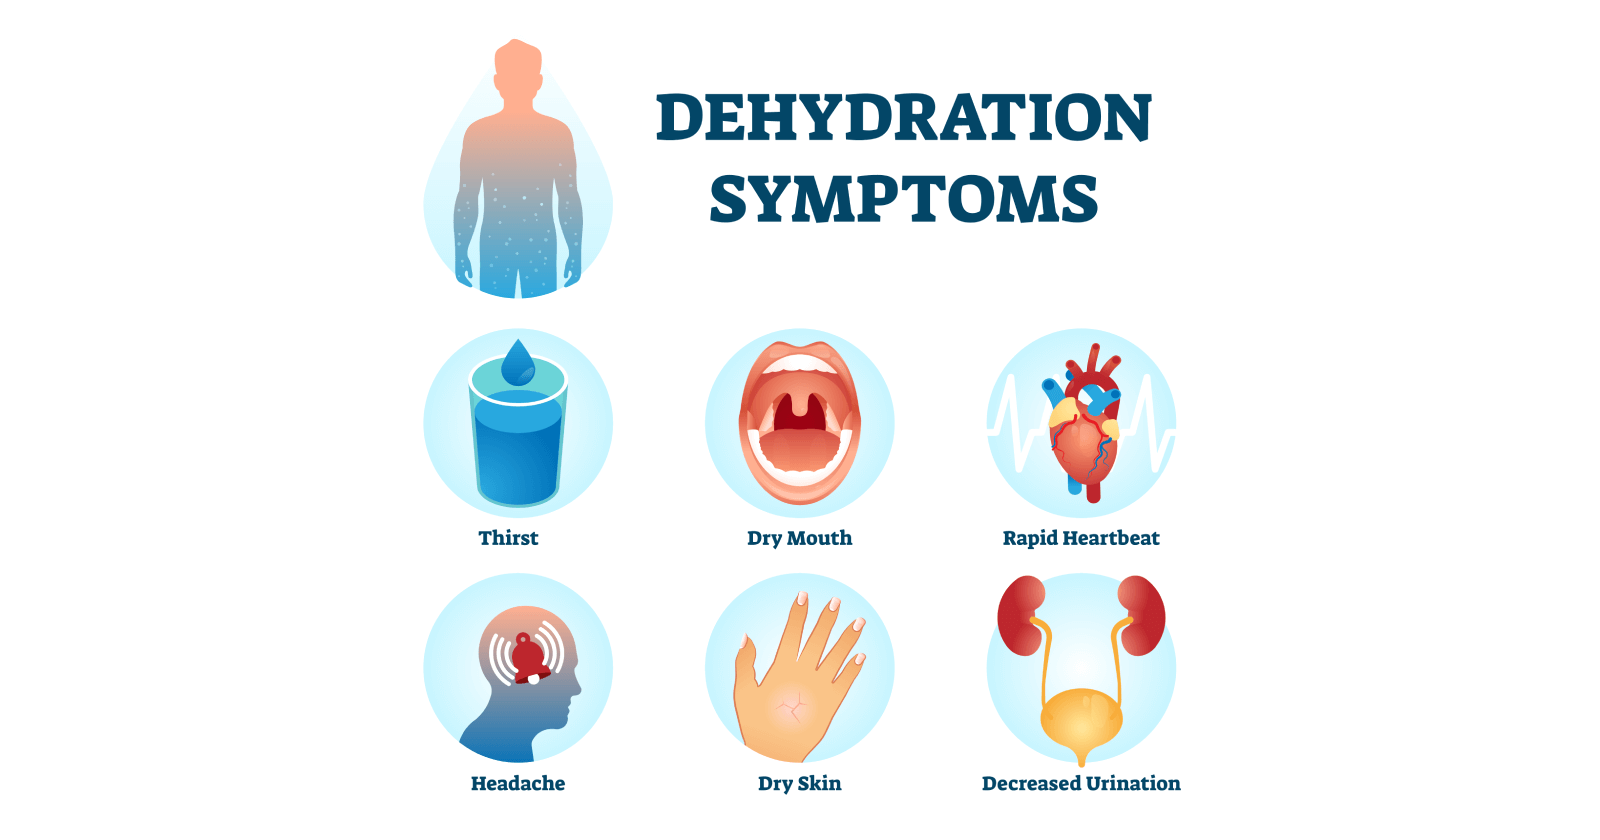 Dehydration Symptoms Causes Prevention And Treatments